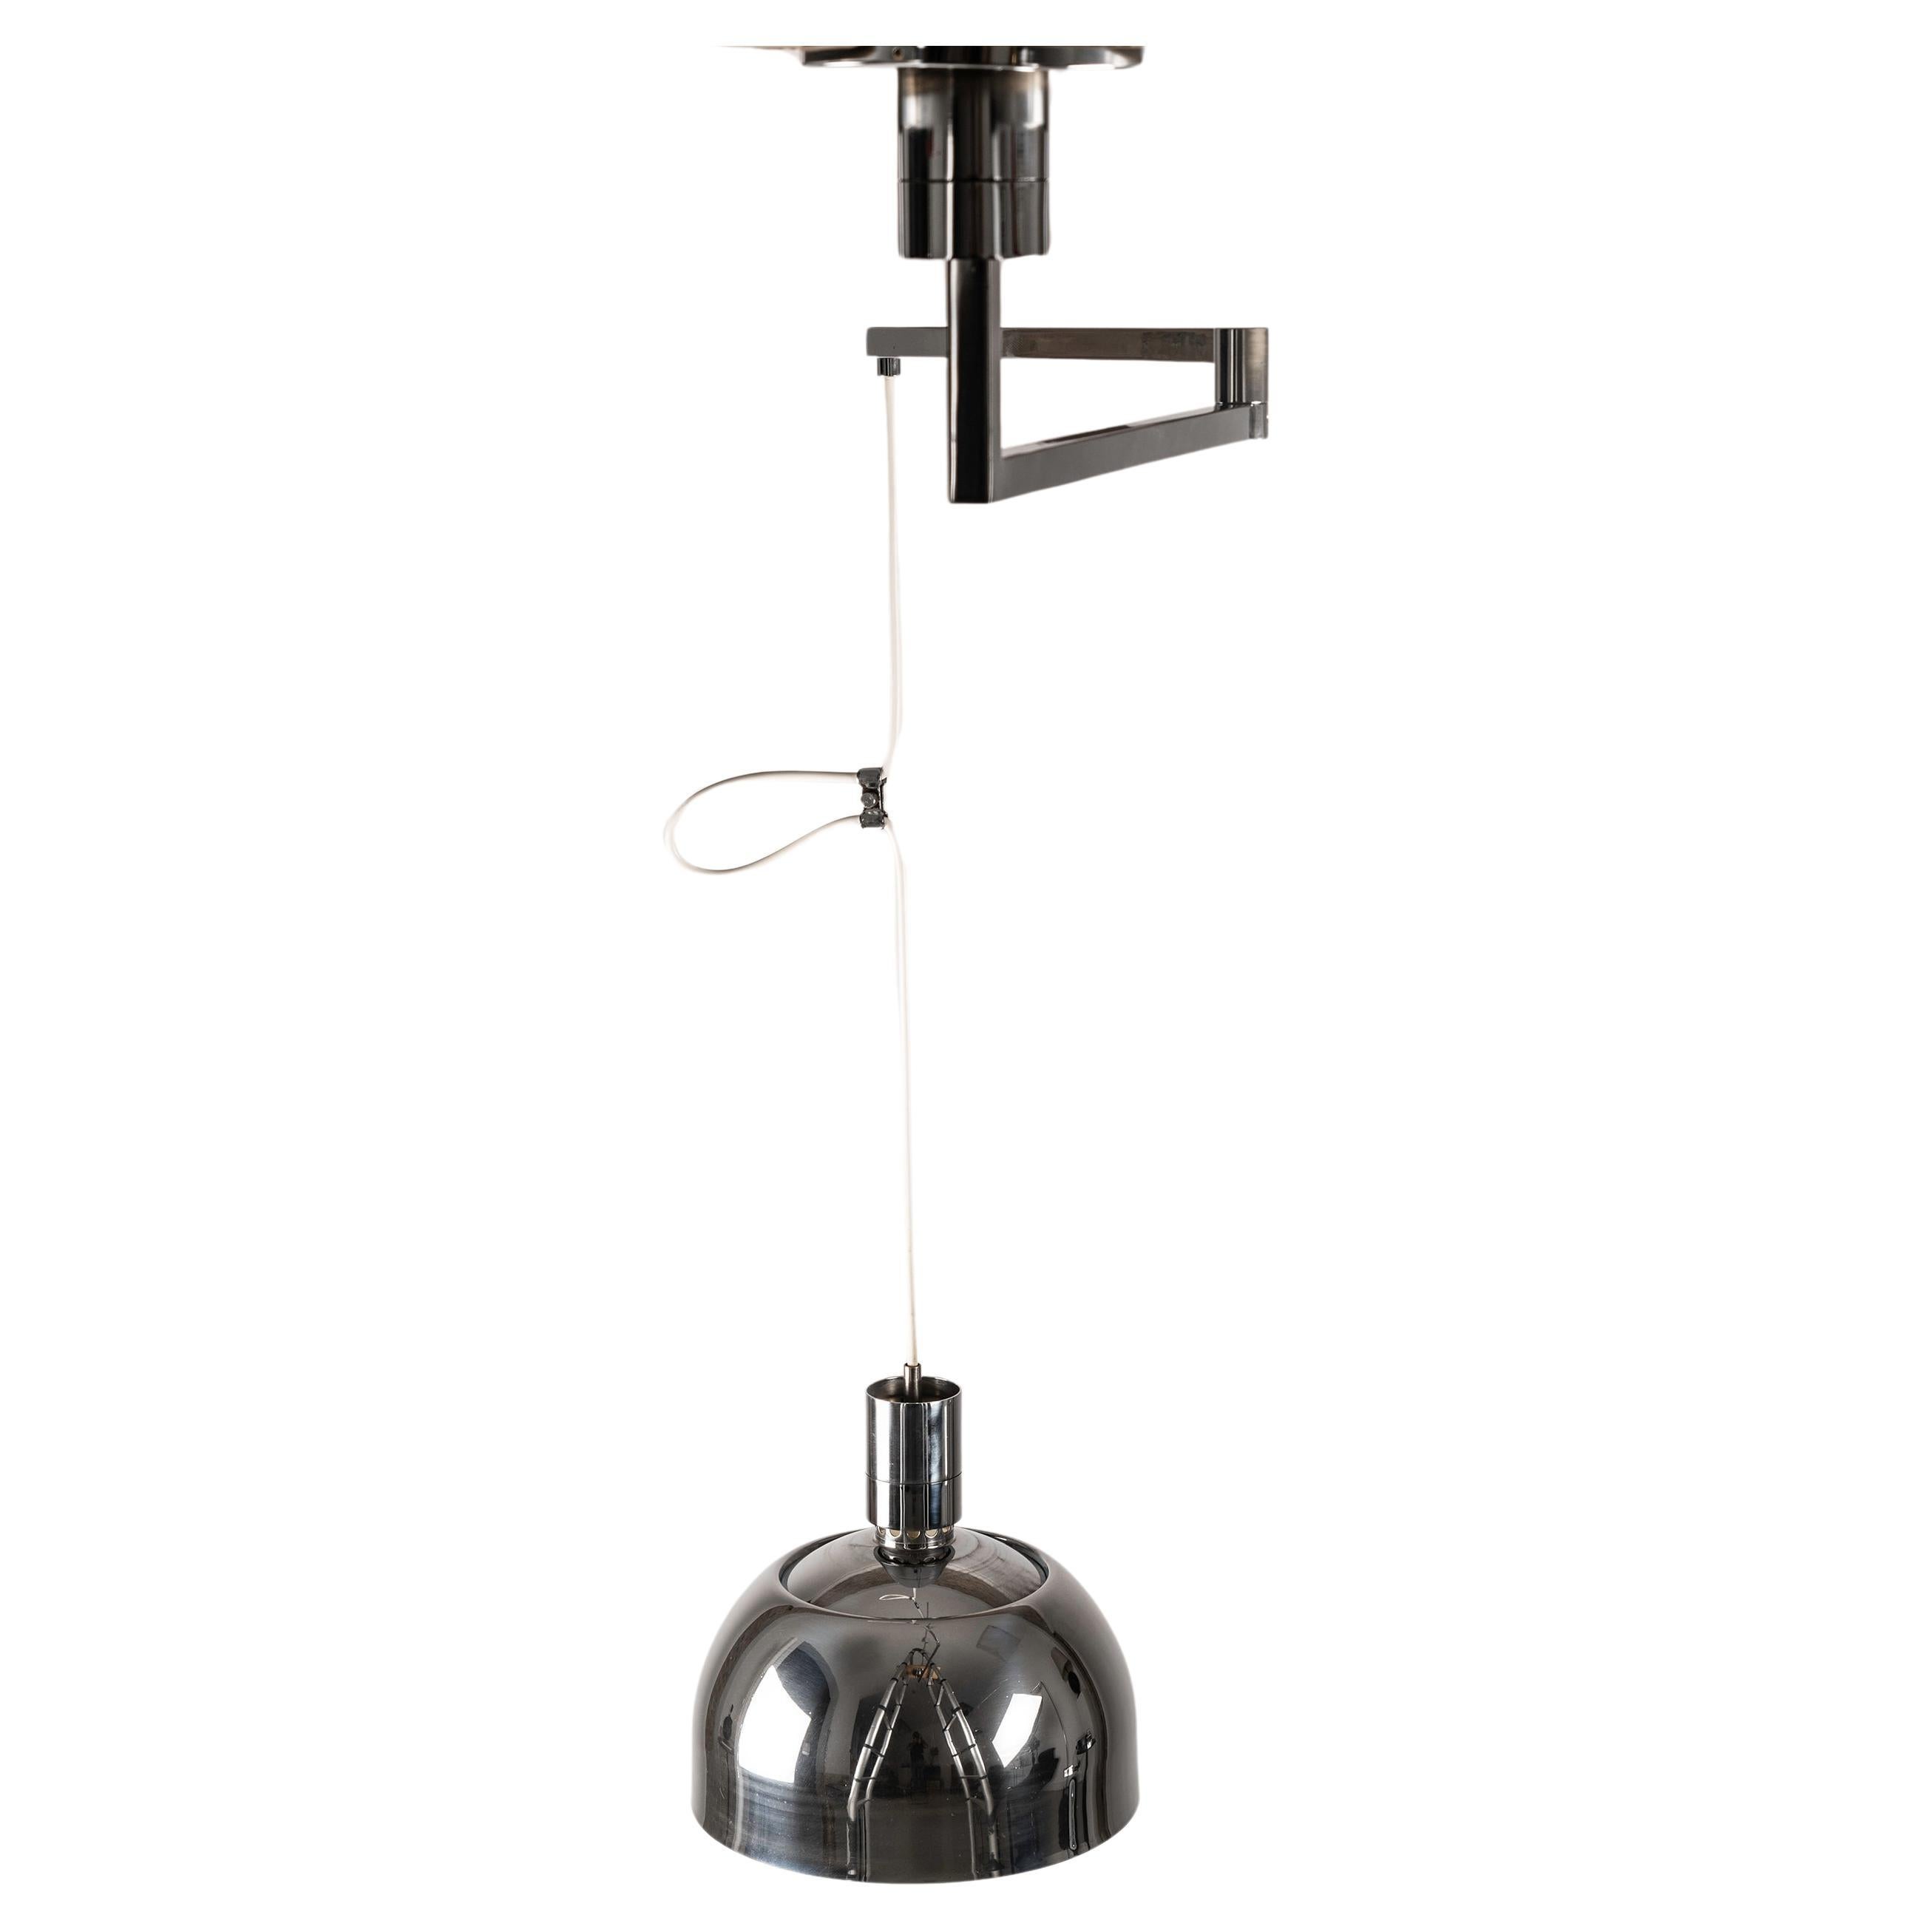 AM/AS Ceiling Lamp with Chromed Swing Arm by Franco Albini for Sirrah, 1960s For Sale